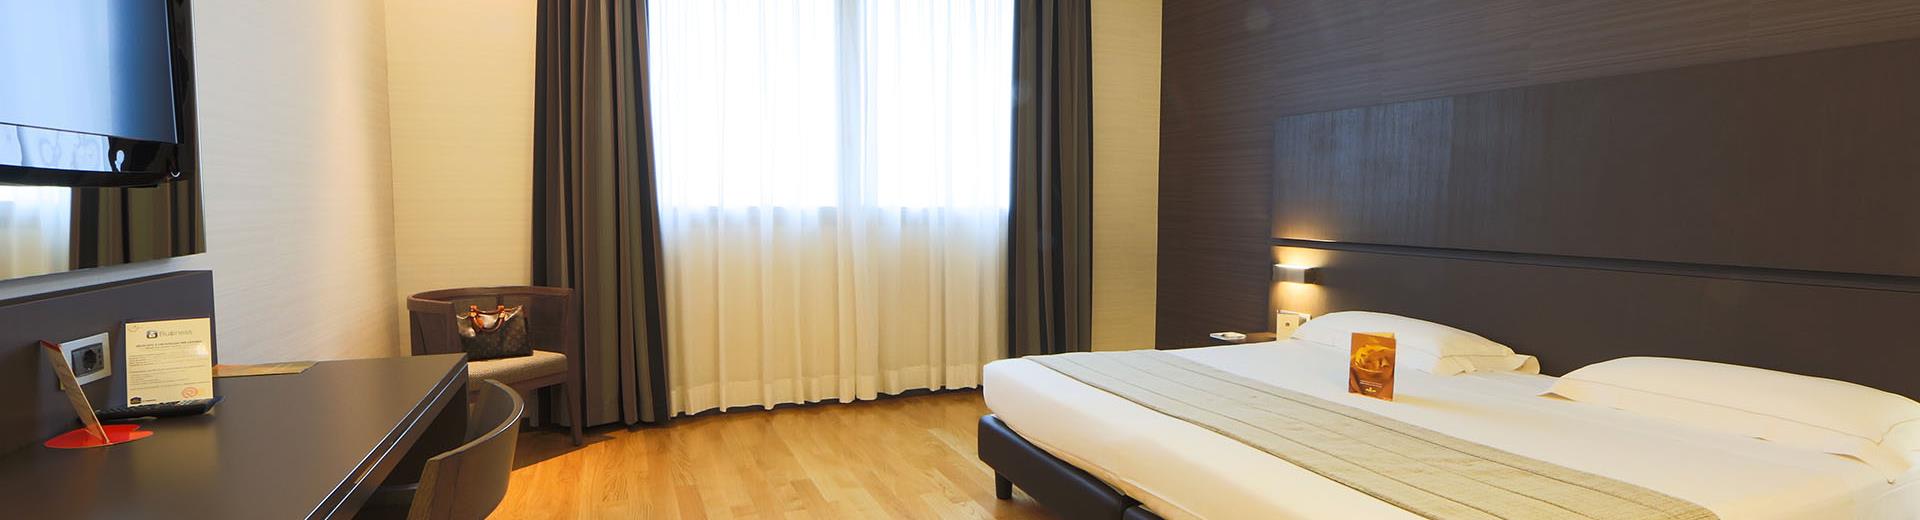 Discover the roomtypes of our 4 star hotel near Milan with every comfort for your business and leisure stay!